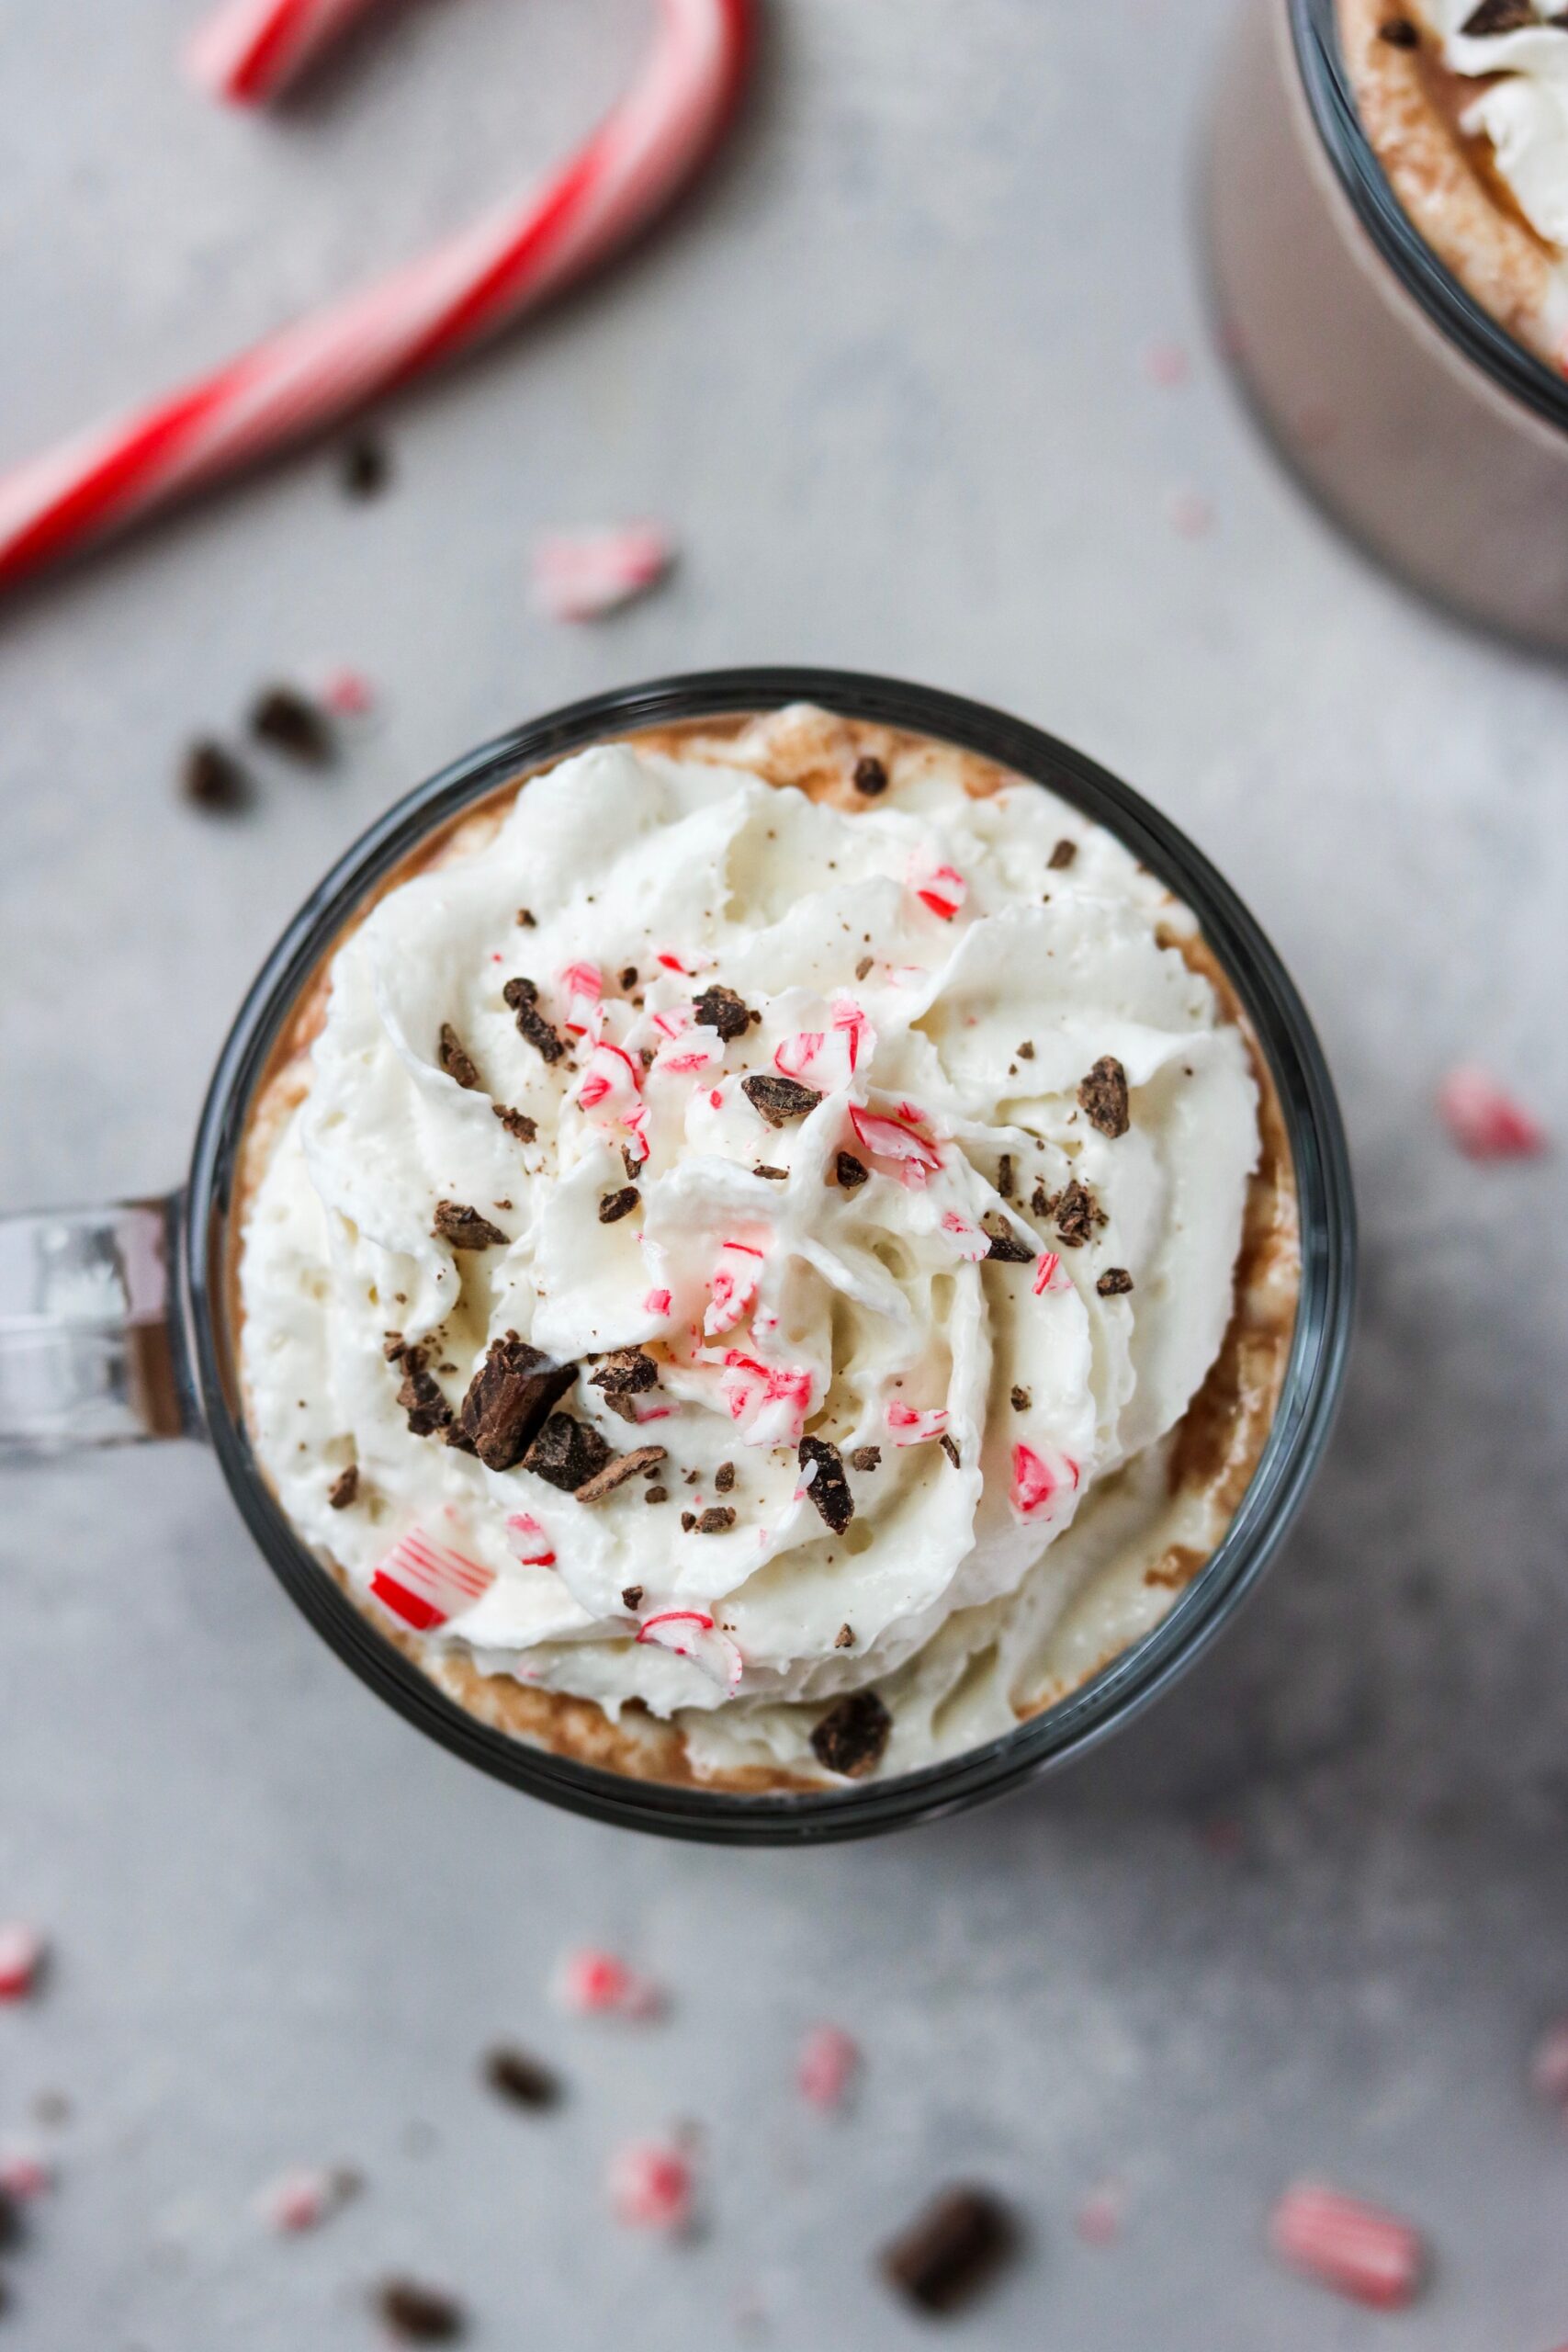 an overhead view of Christmas hot chocolate with whipped cream, peppermint and chocolate crumbles